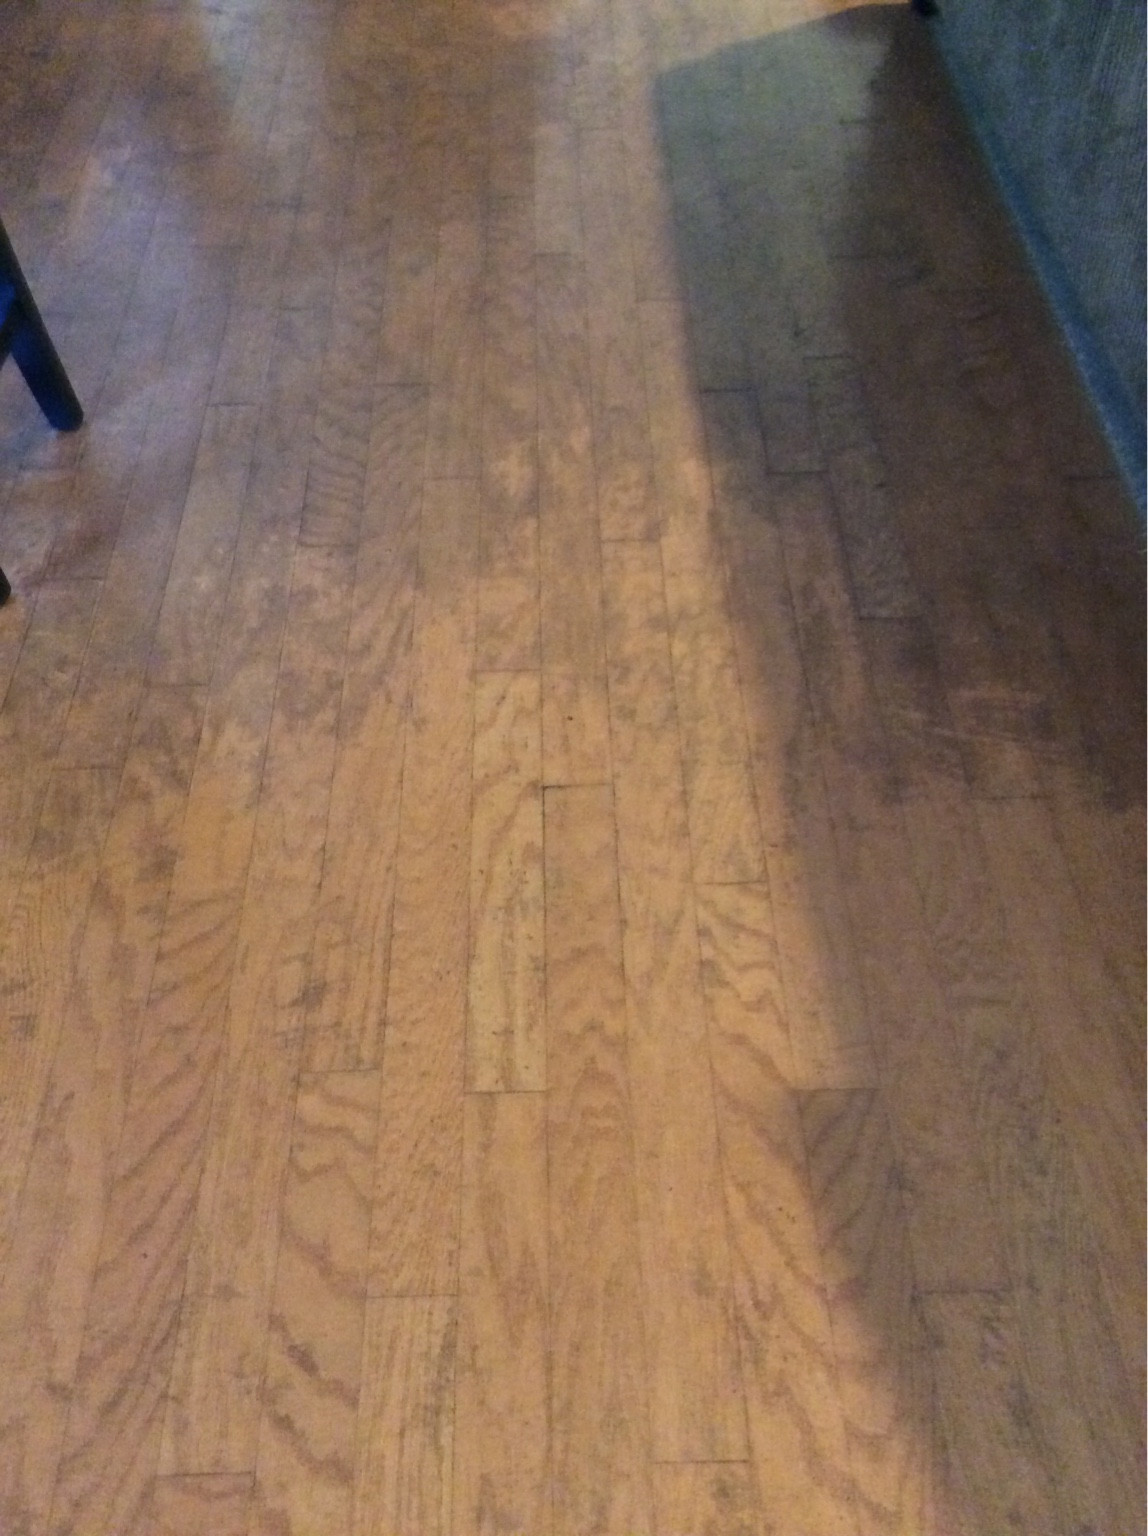 cleaning products for engineered hardwood floors of hardwood floor cleaning help truckmount forums 1 carpet pertaining to how would you guys clean this wood floors